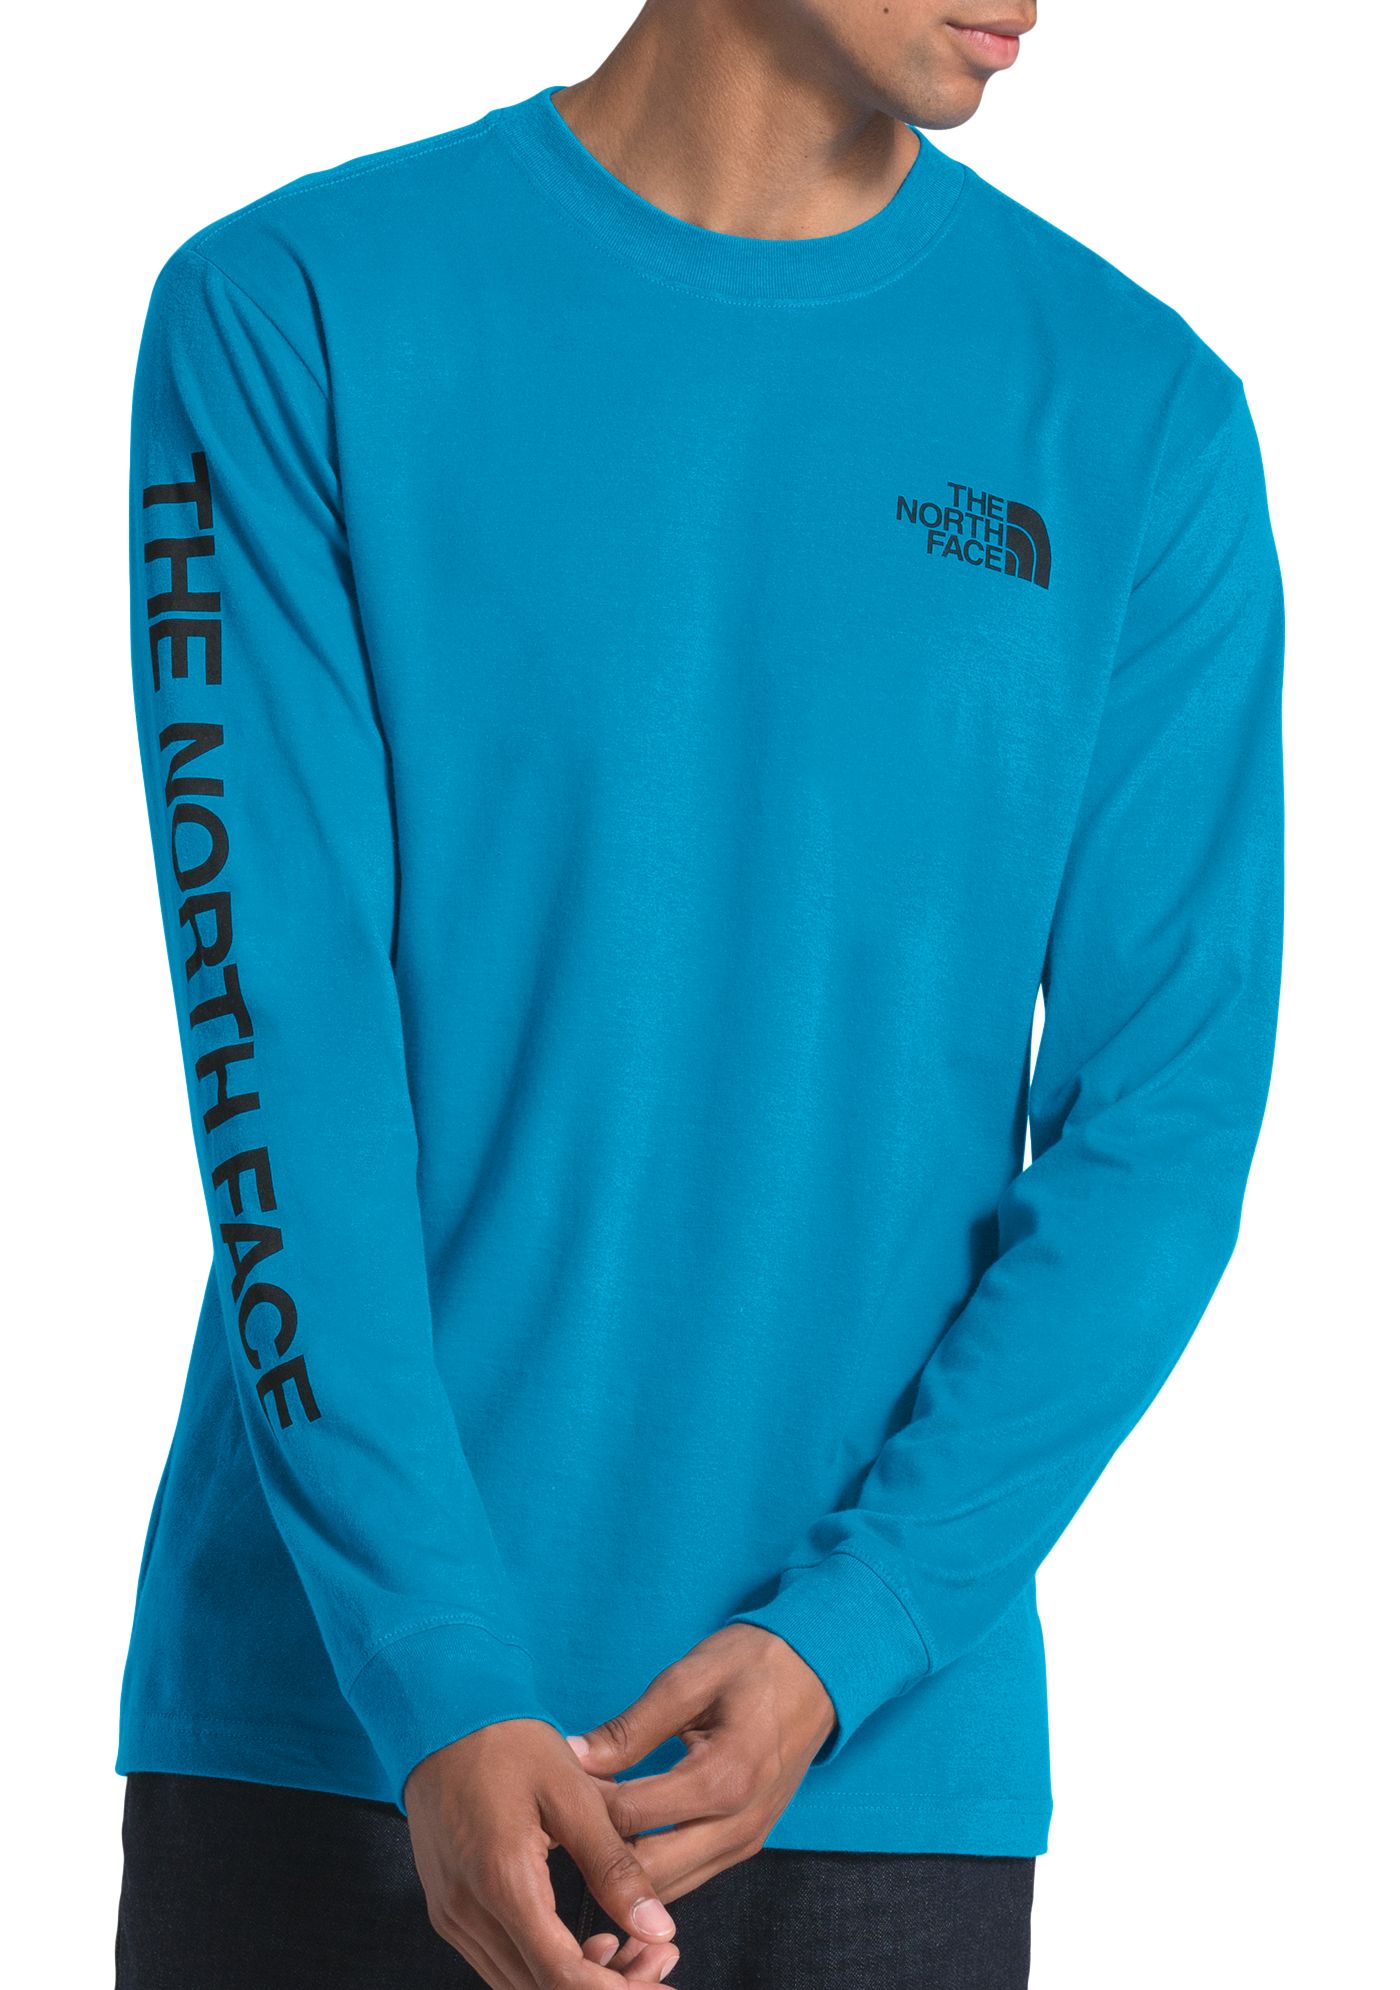 The North Face Men's Long Sleeve Brand Proud Cotton T-Shirt | DICK'S Sporting Goods